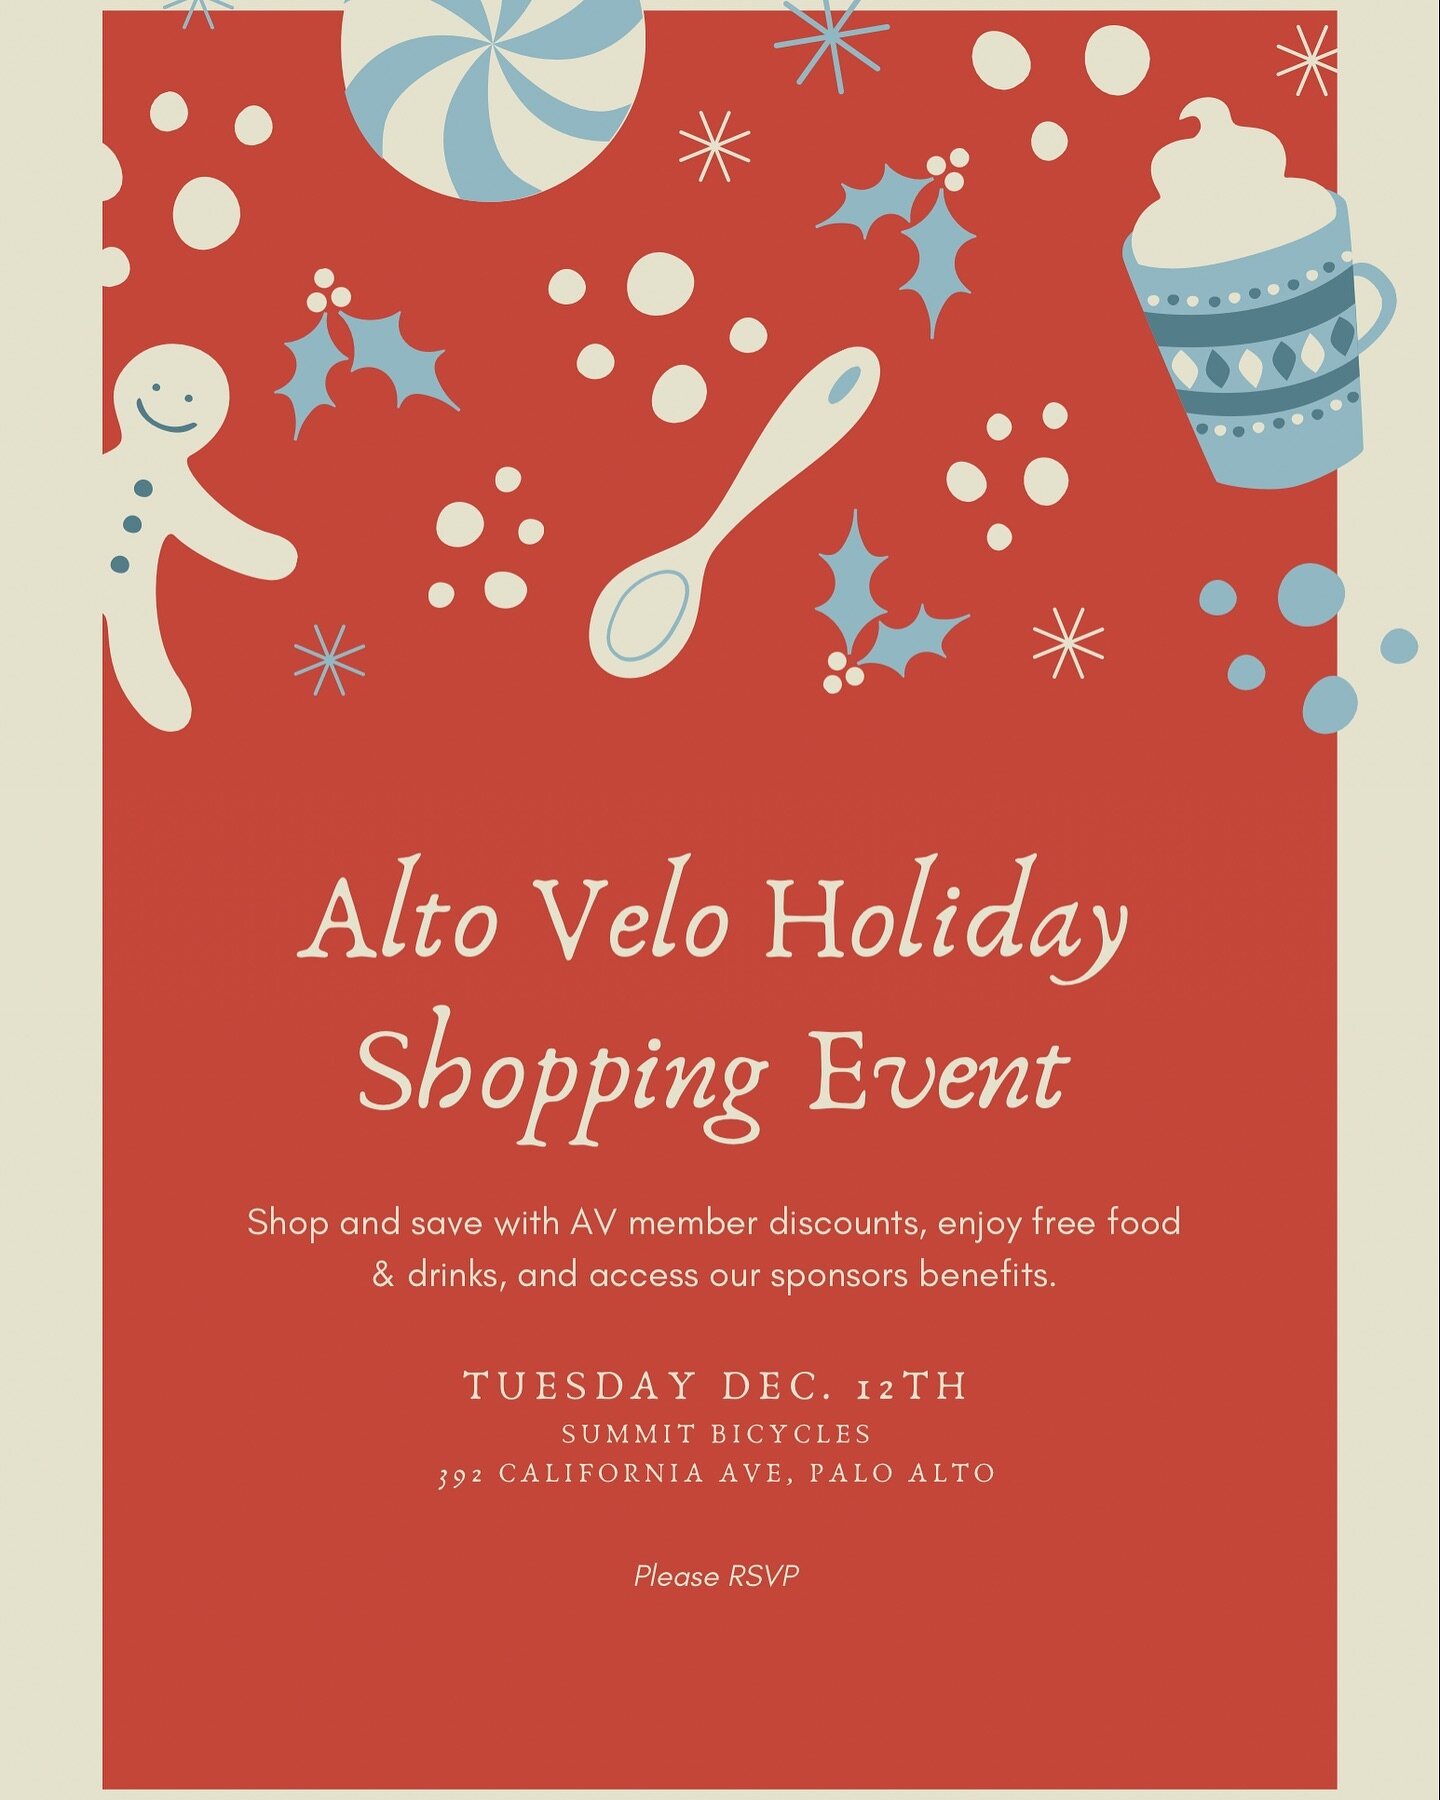 🛍️ Join us for the holiday shopping event. You will access to discounted cycling gears (apply to AV members), enjoy food 🍕&amp; drinks 🍾, and chat with our sponsors about the AV members&rsquo; benefits.

🎁 For each purchase, you will get a raffle